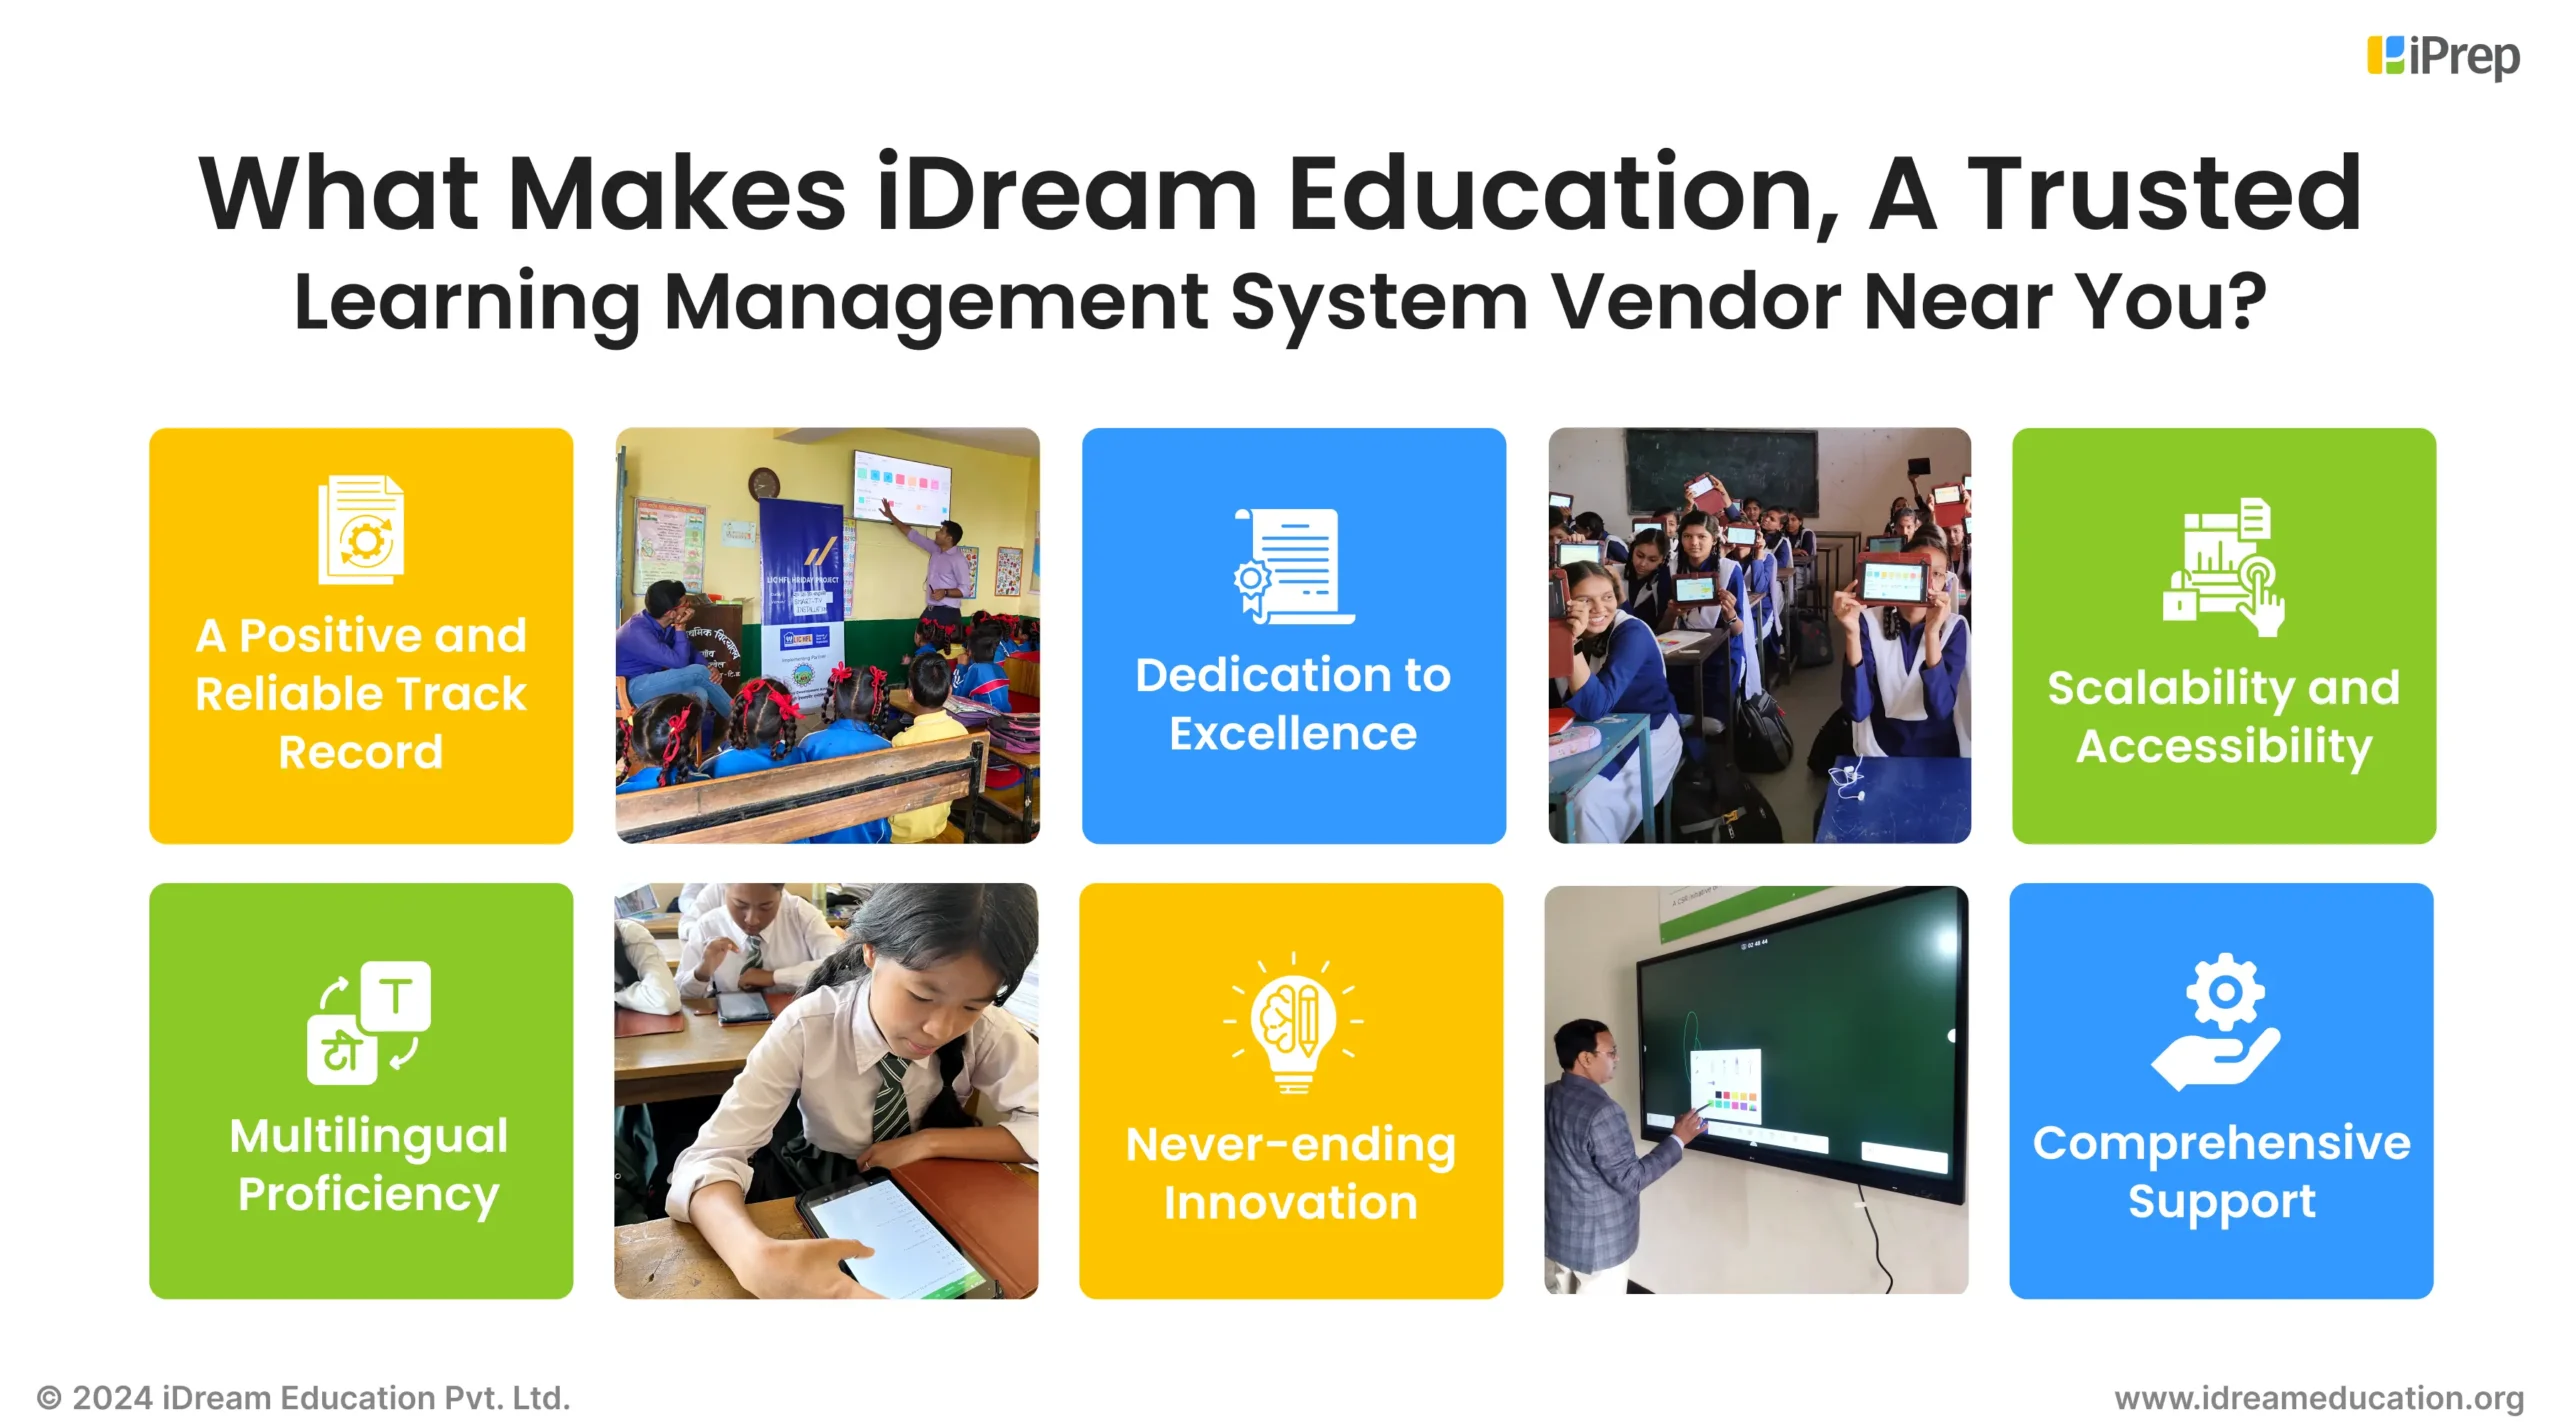 An illustration of what makes iDream Education a trusted learning management system vendor near you 